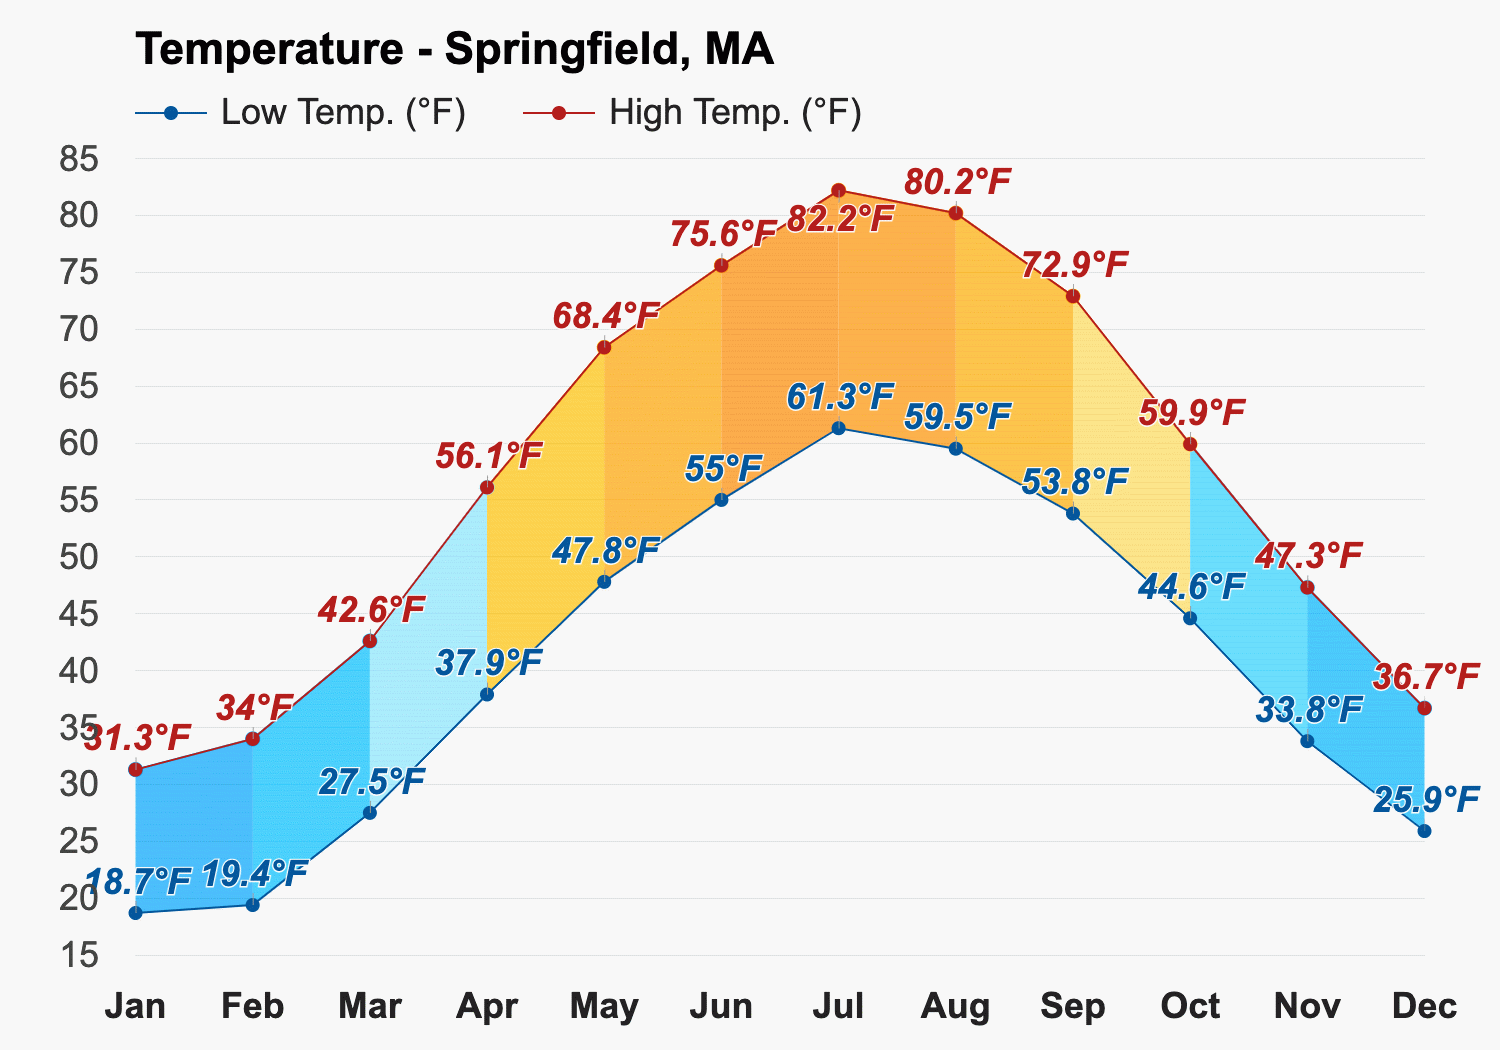 Springfield, MA   Detailed climate information and monthly weather ...